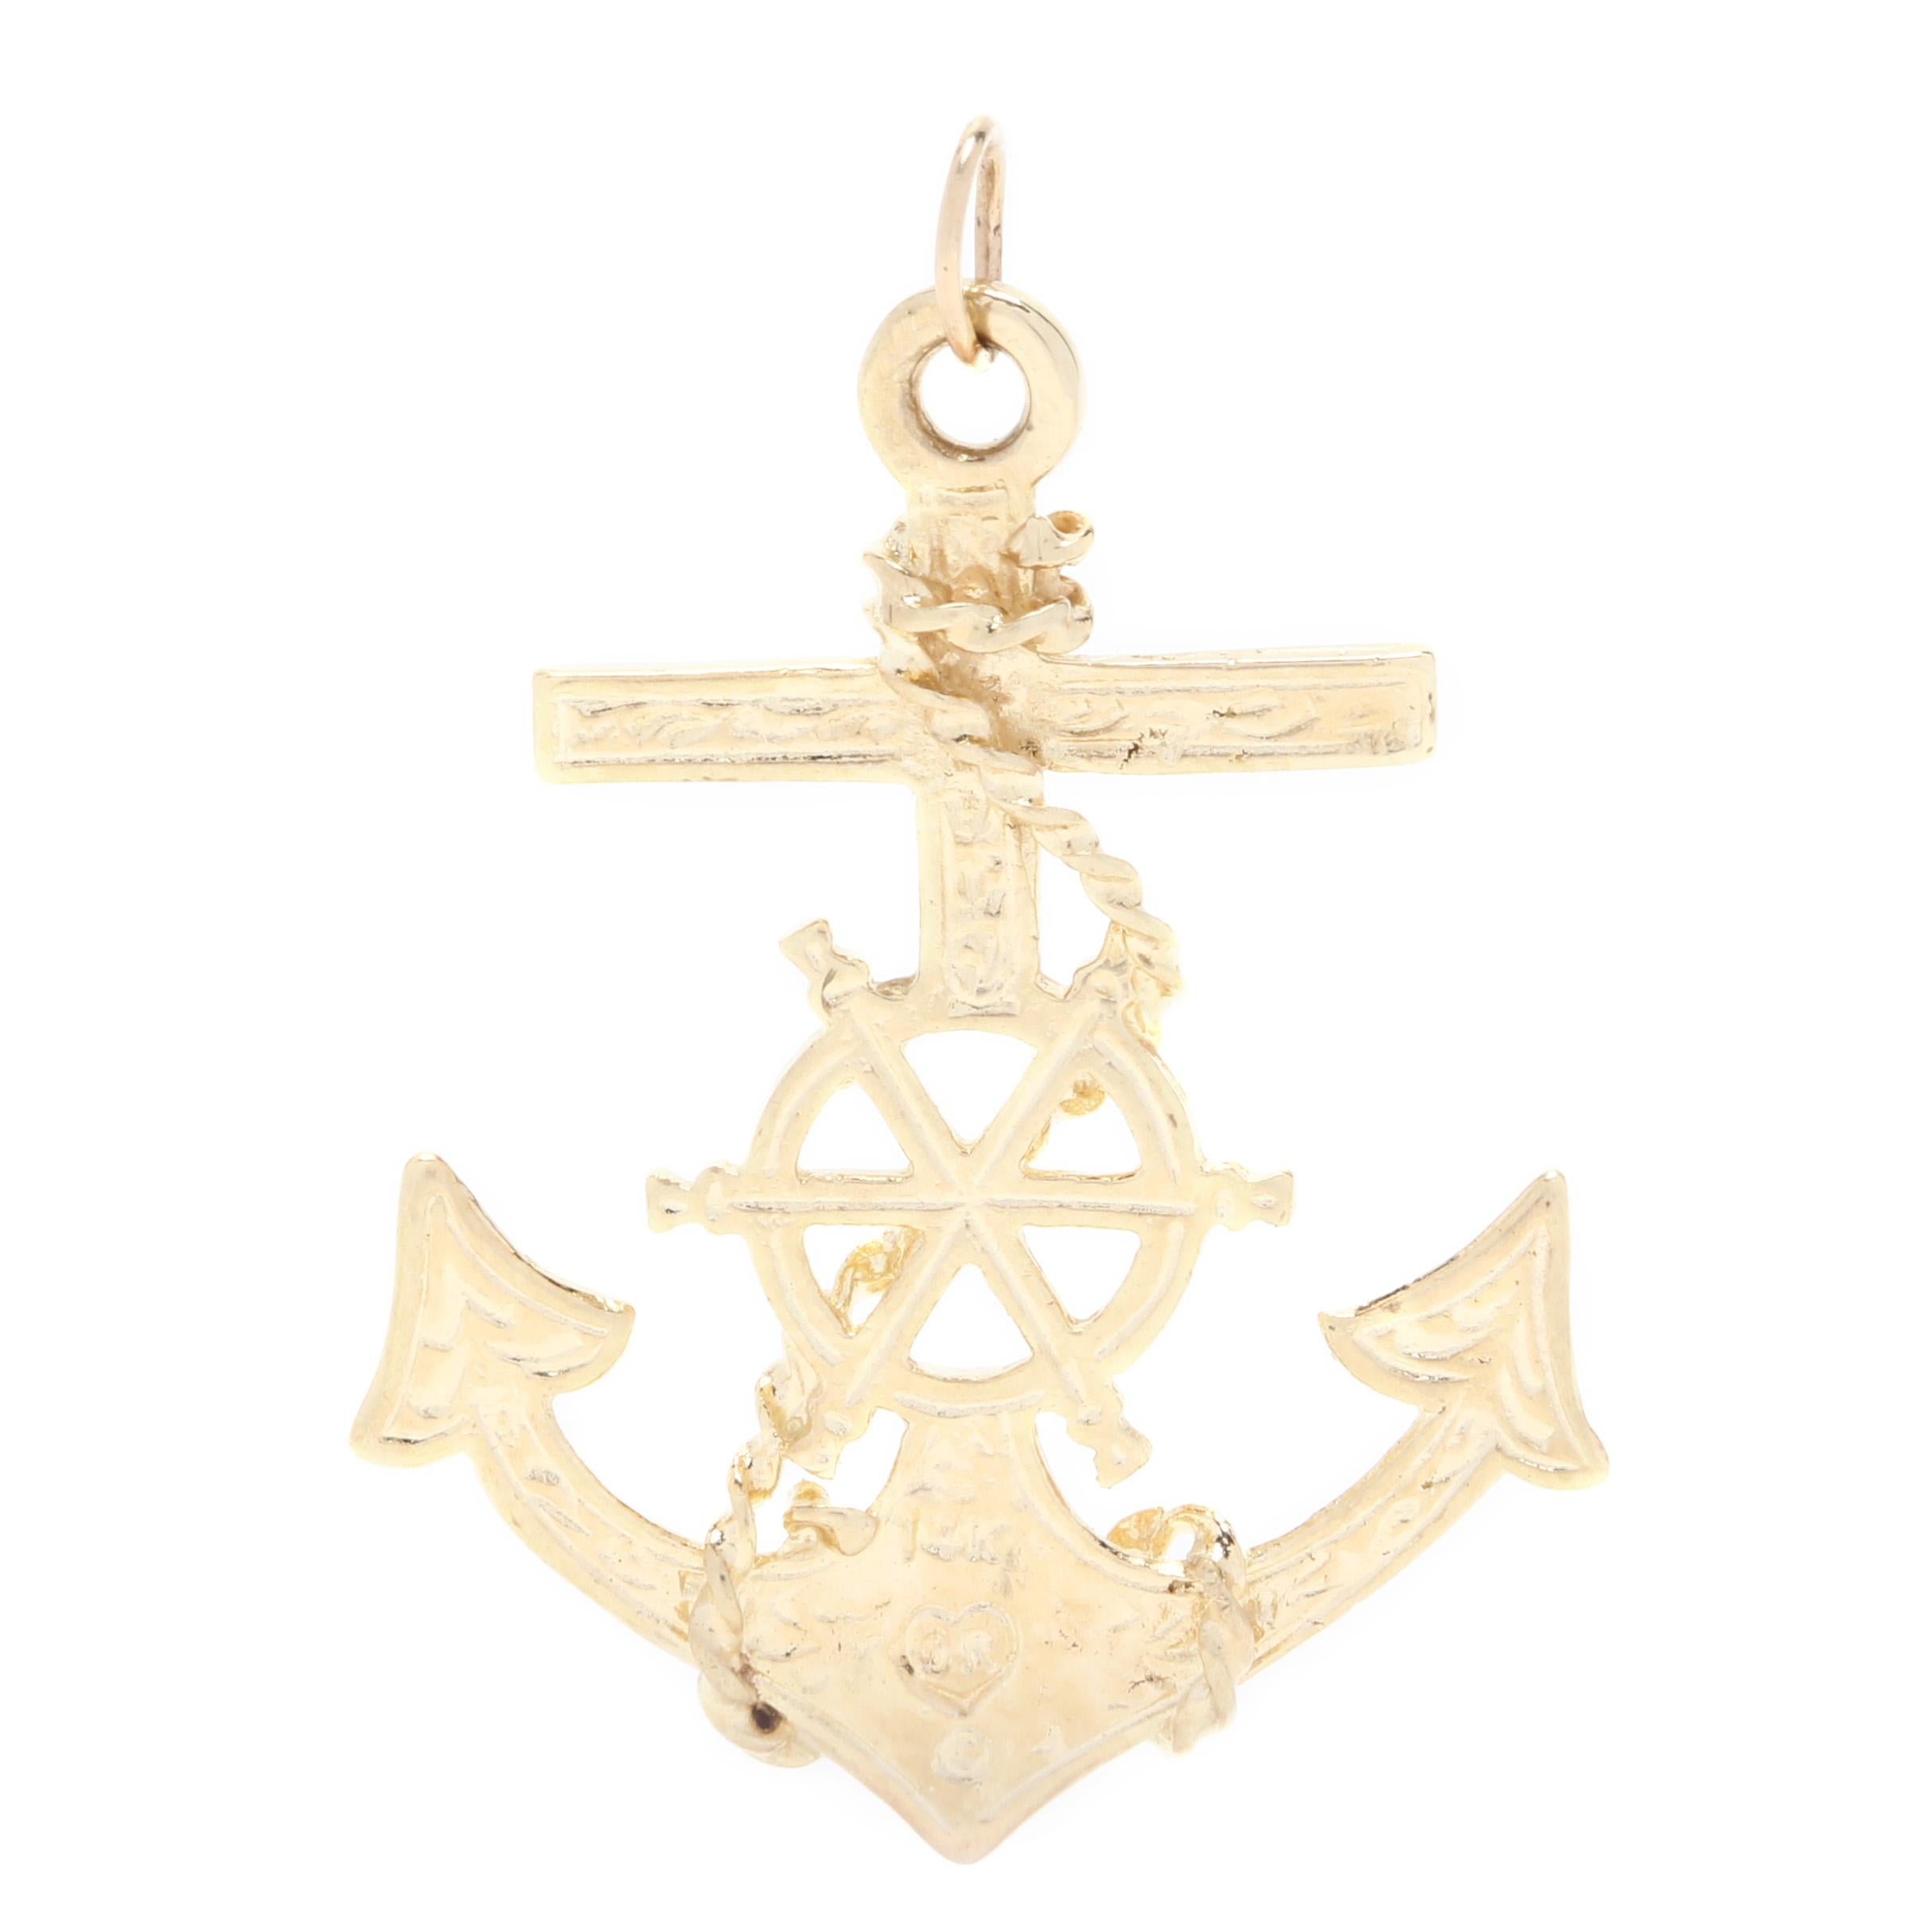 A 14 karat yellow gold anchor charm / pendant. This pendant features an anchor motif with a center wheel and a rope motif coiled throughout.

Length: 1 1/8 in.

Width: 3/4 in.

1.37 dwts.

* Please note that this is a vintage item and may show signs